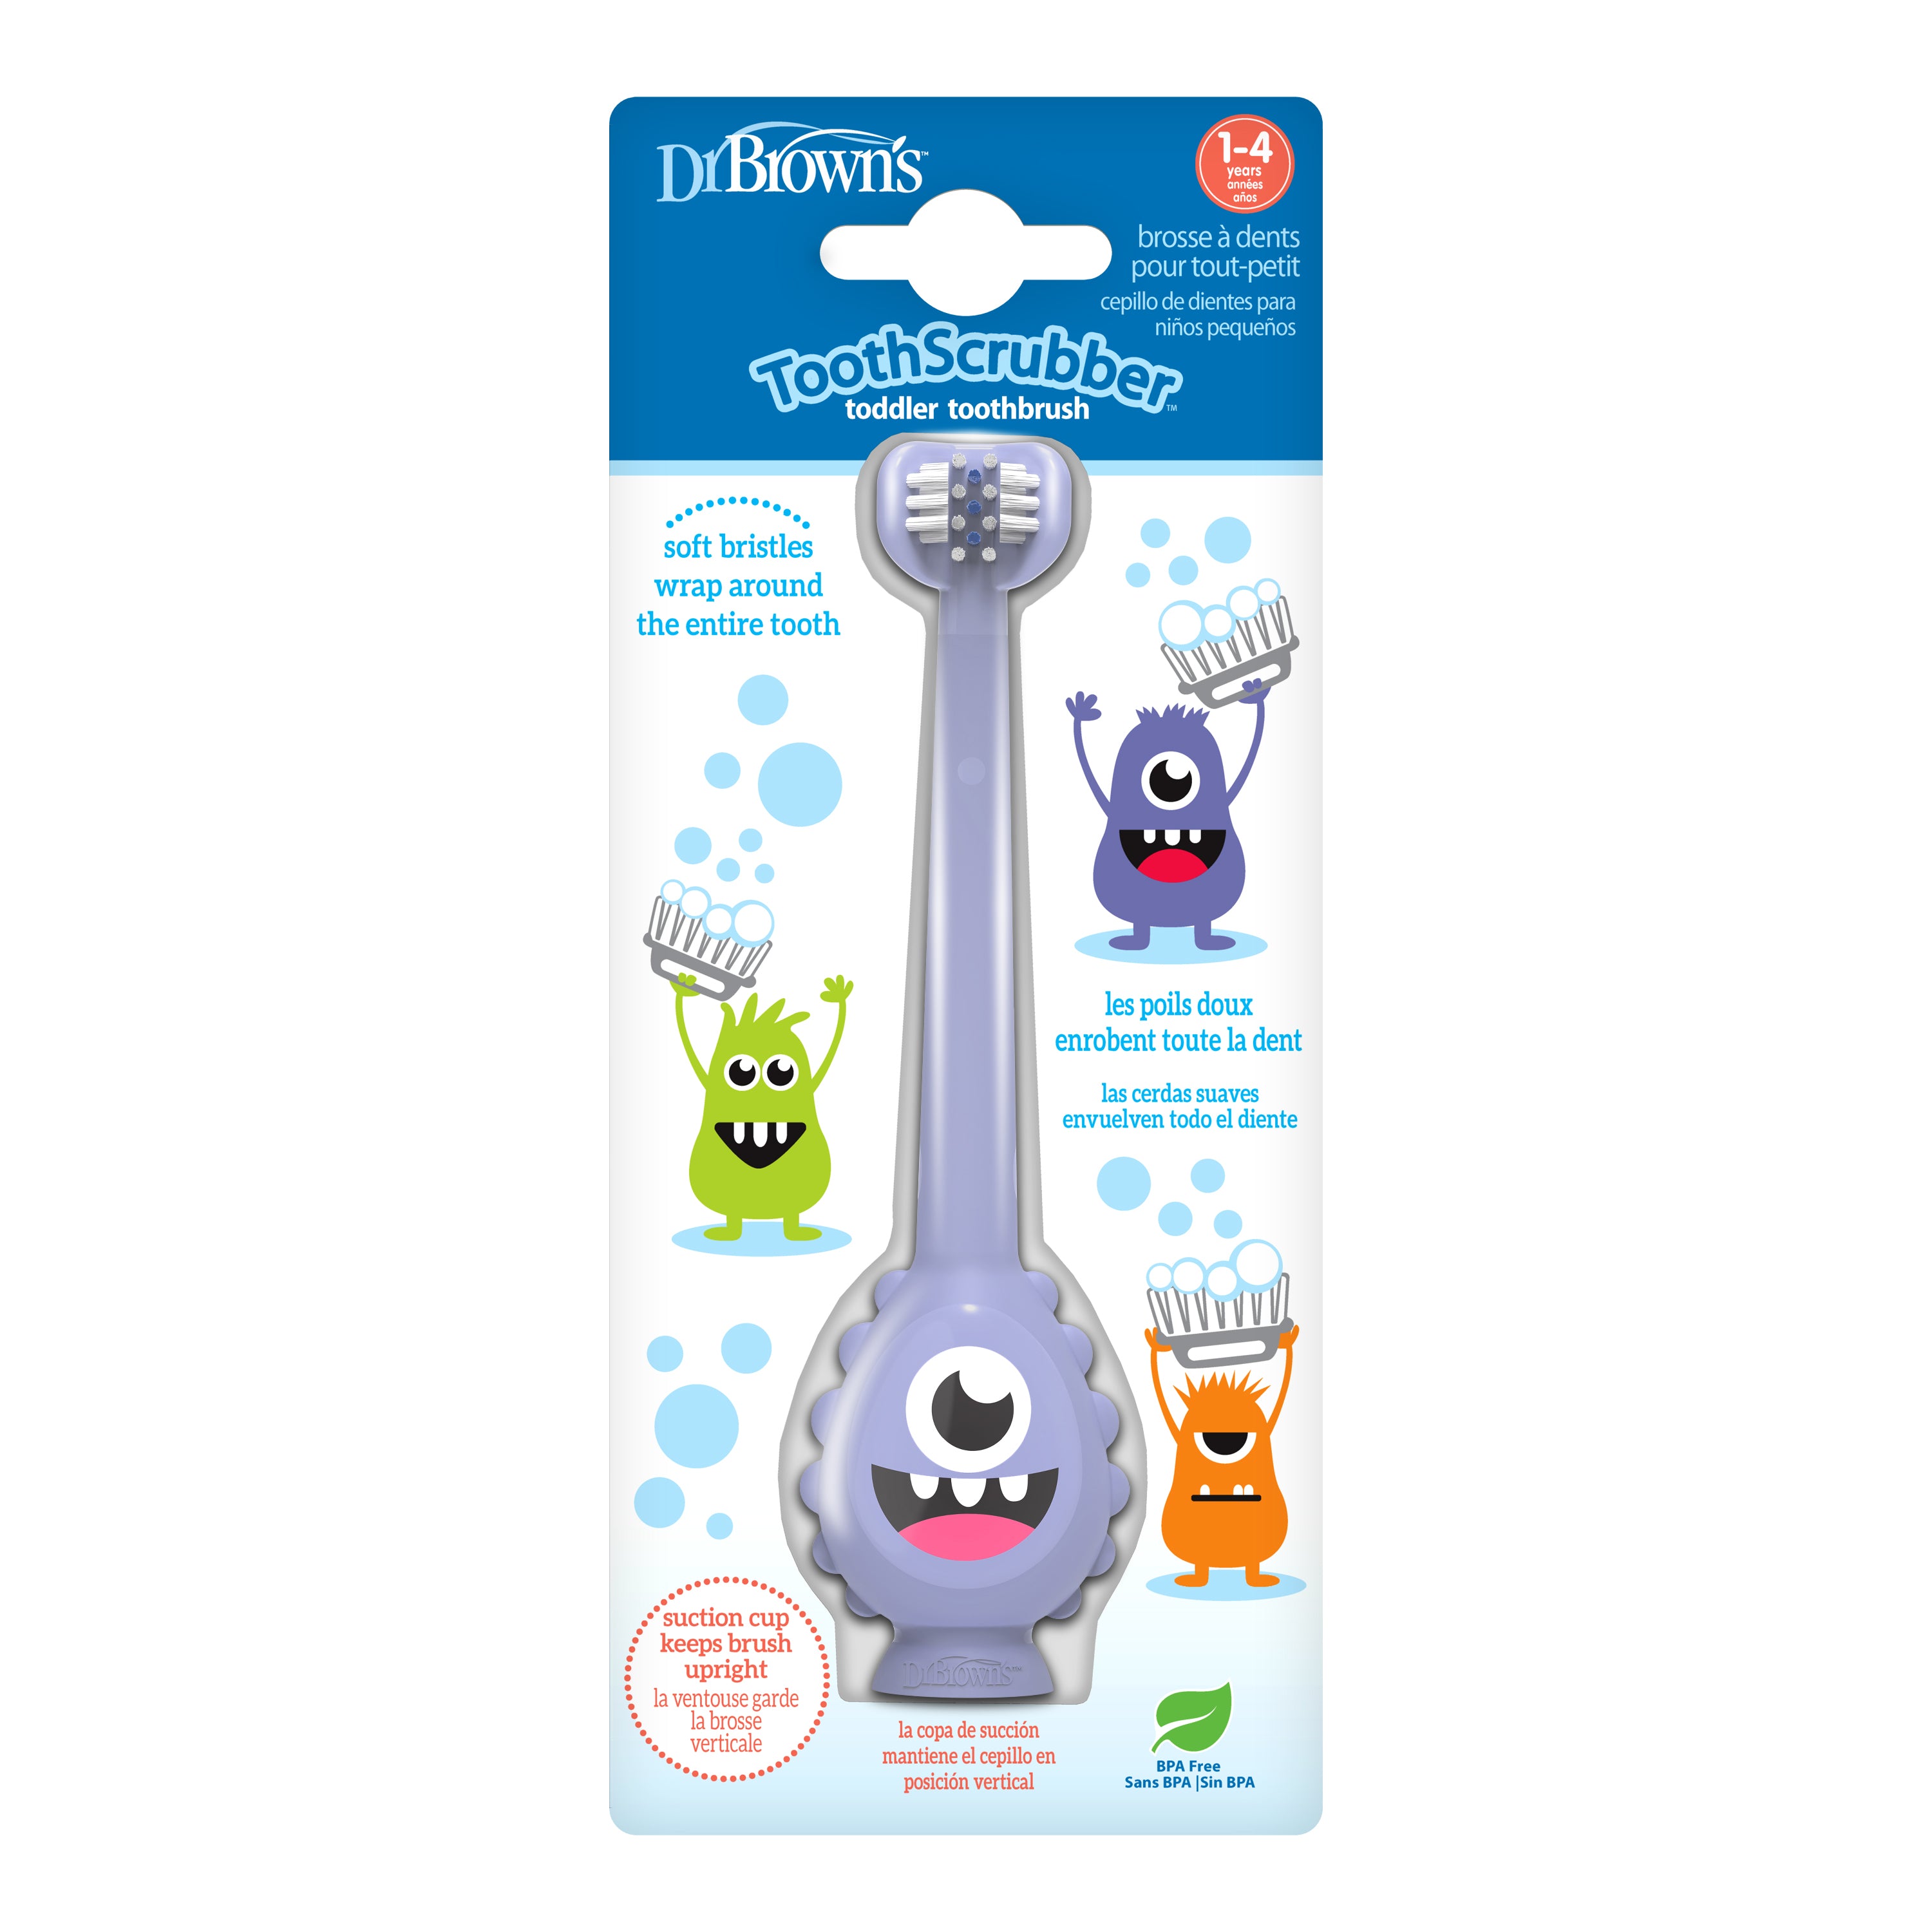 Dr. Brown's Toothscrubber Toddler Toothbrush